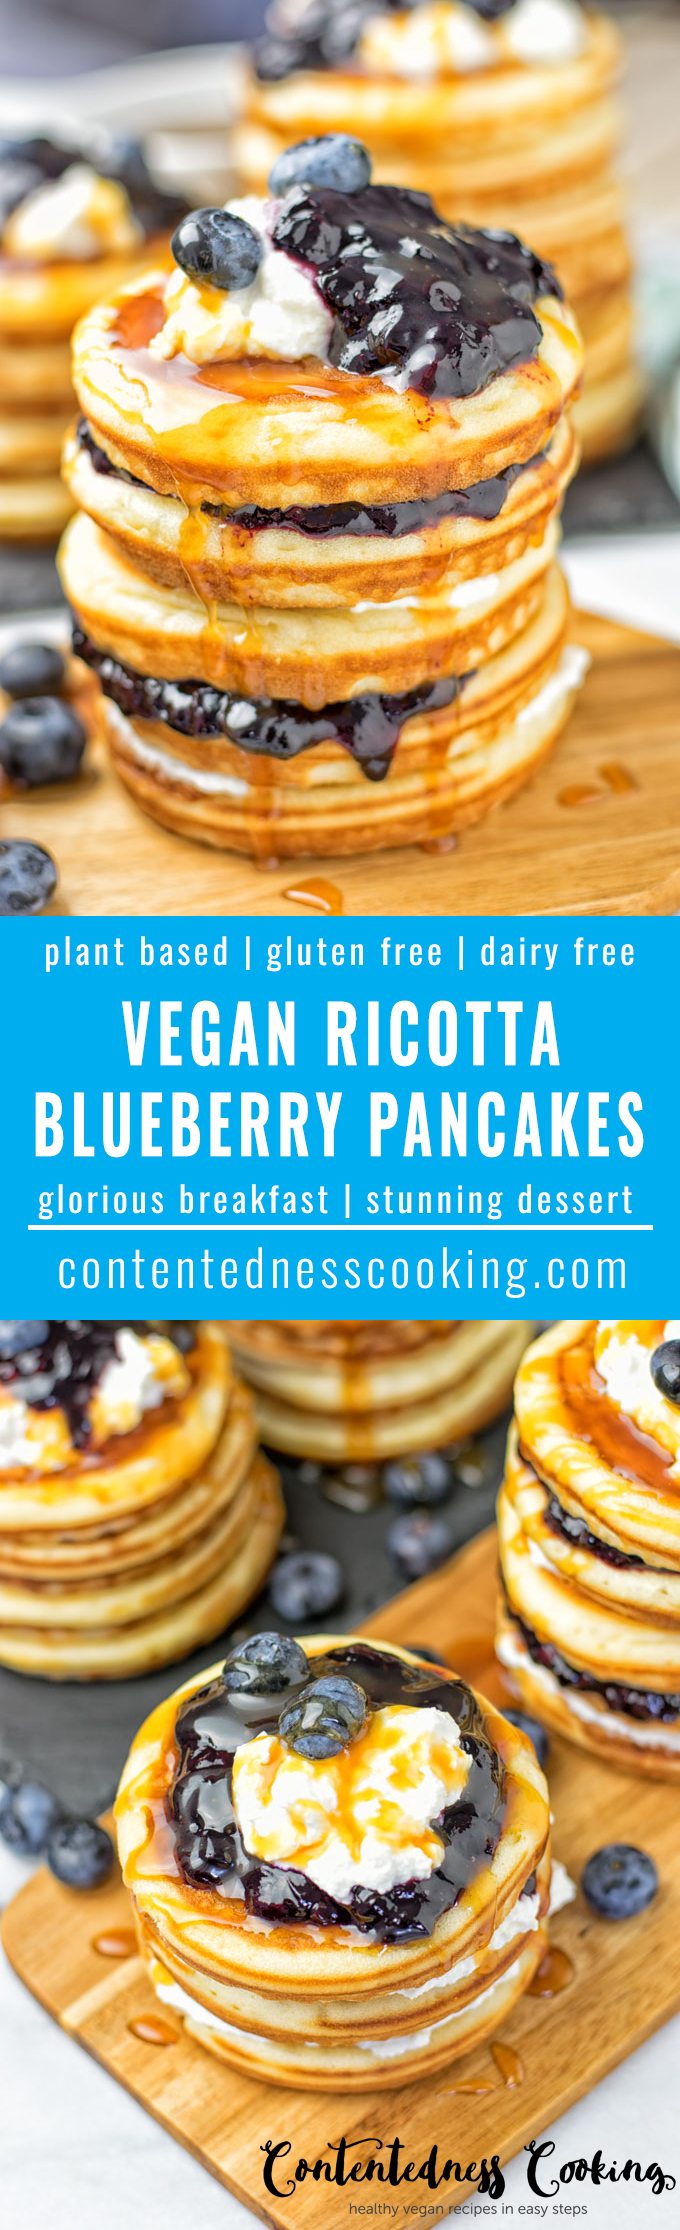 Collage of two pictures of Vegan Ricotta Blueberry Pancakes with recipe title text.